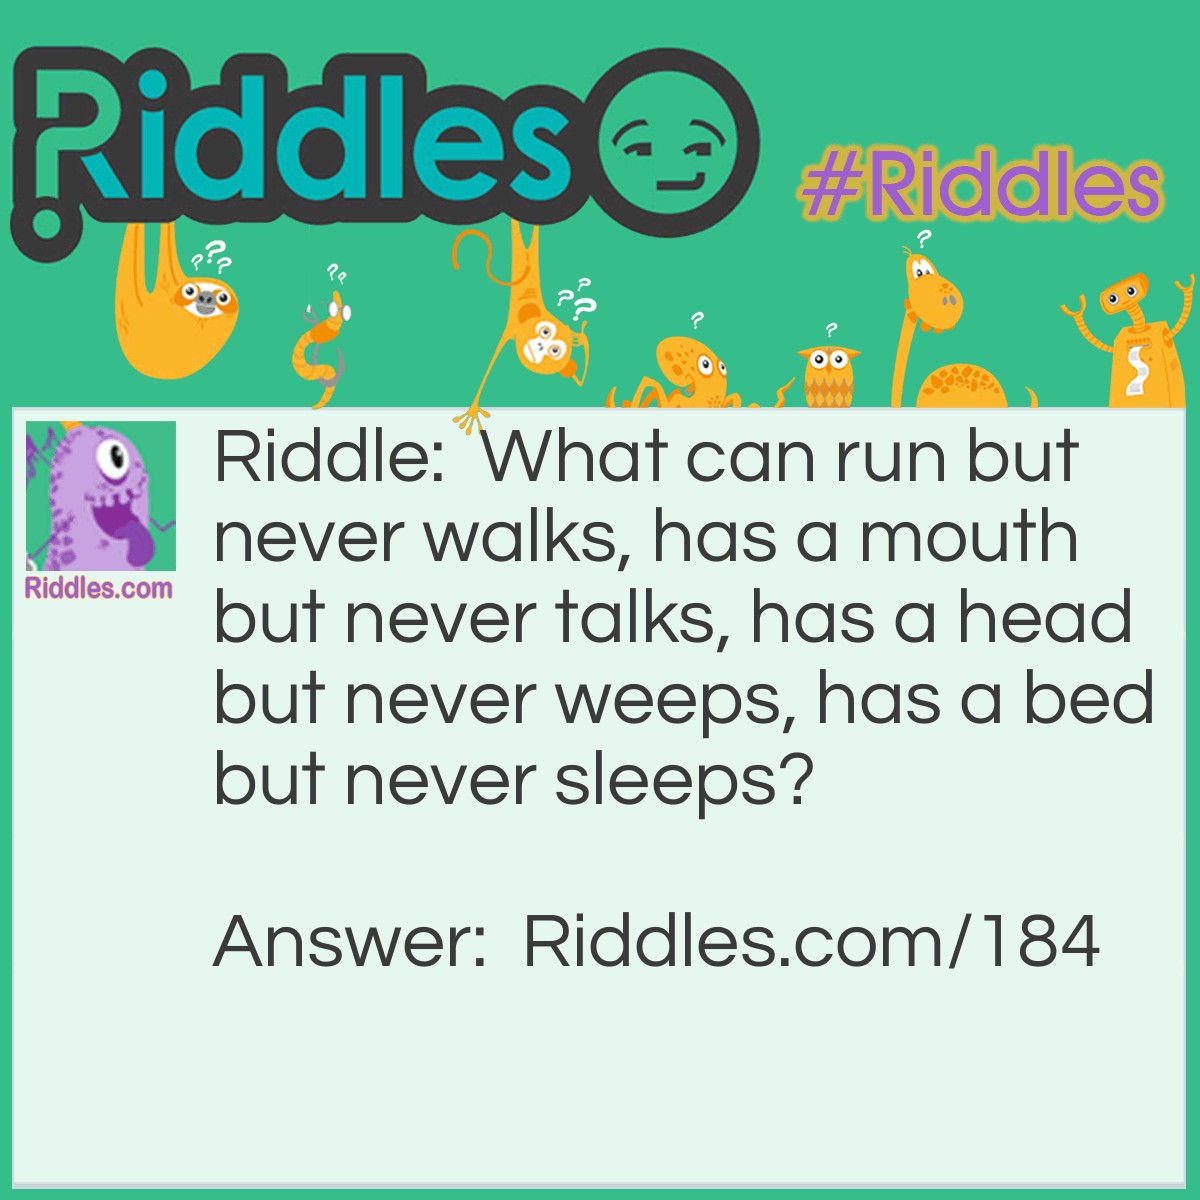 Riddle: What can run but never walks, has a mouth but never talks, has a head but never weeps, has a bed but never sleeps? Answer: A river.